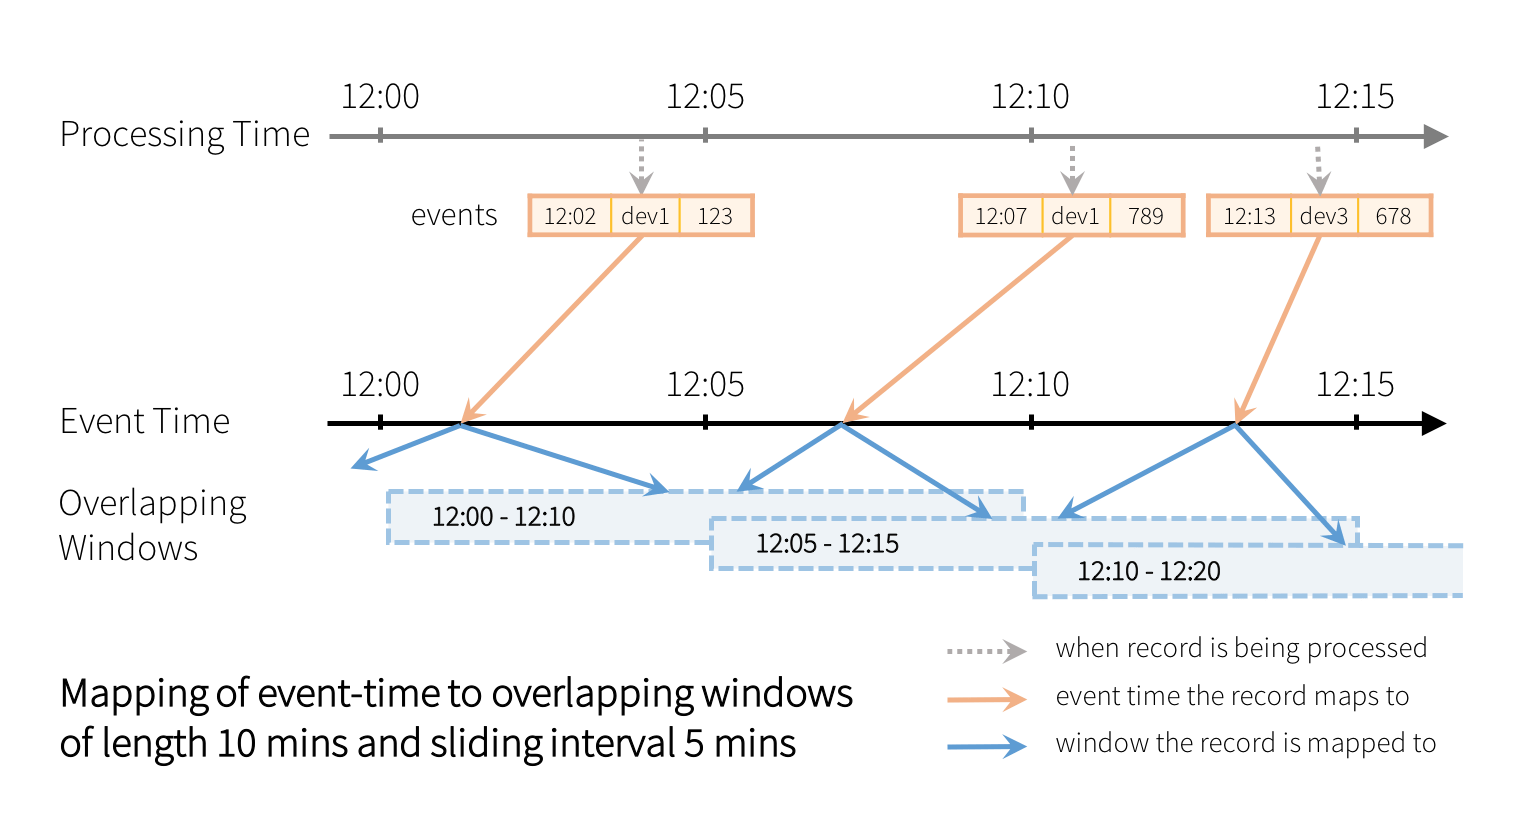 Mapping of event-time to overlapping windows of length 10 mins and sliding interval 5 mins